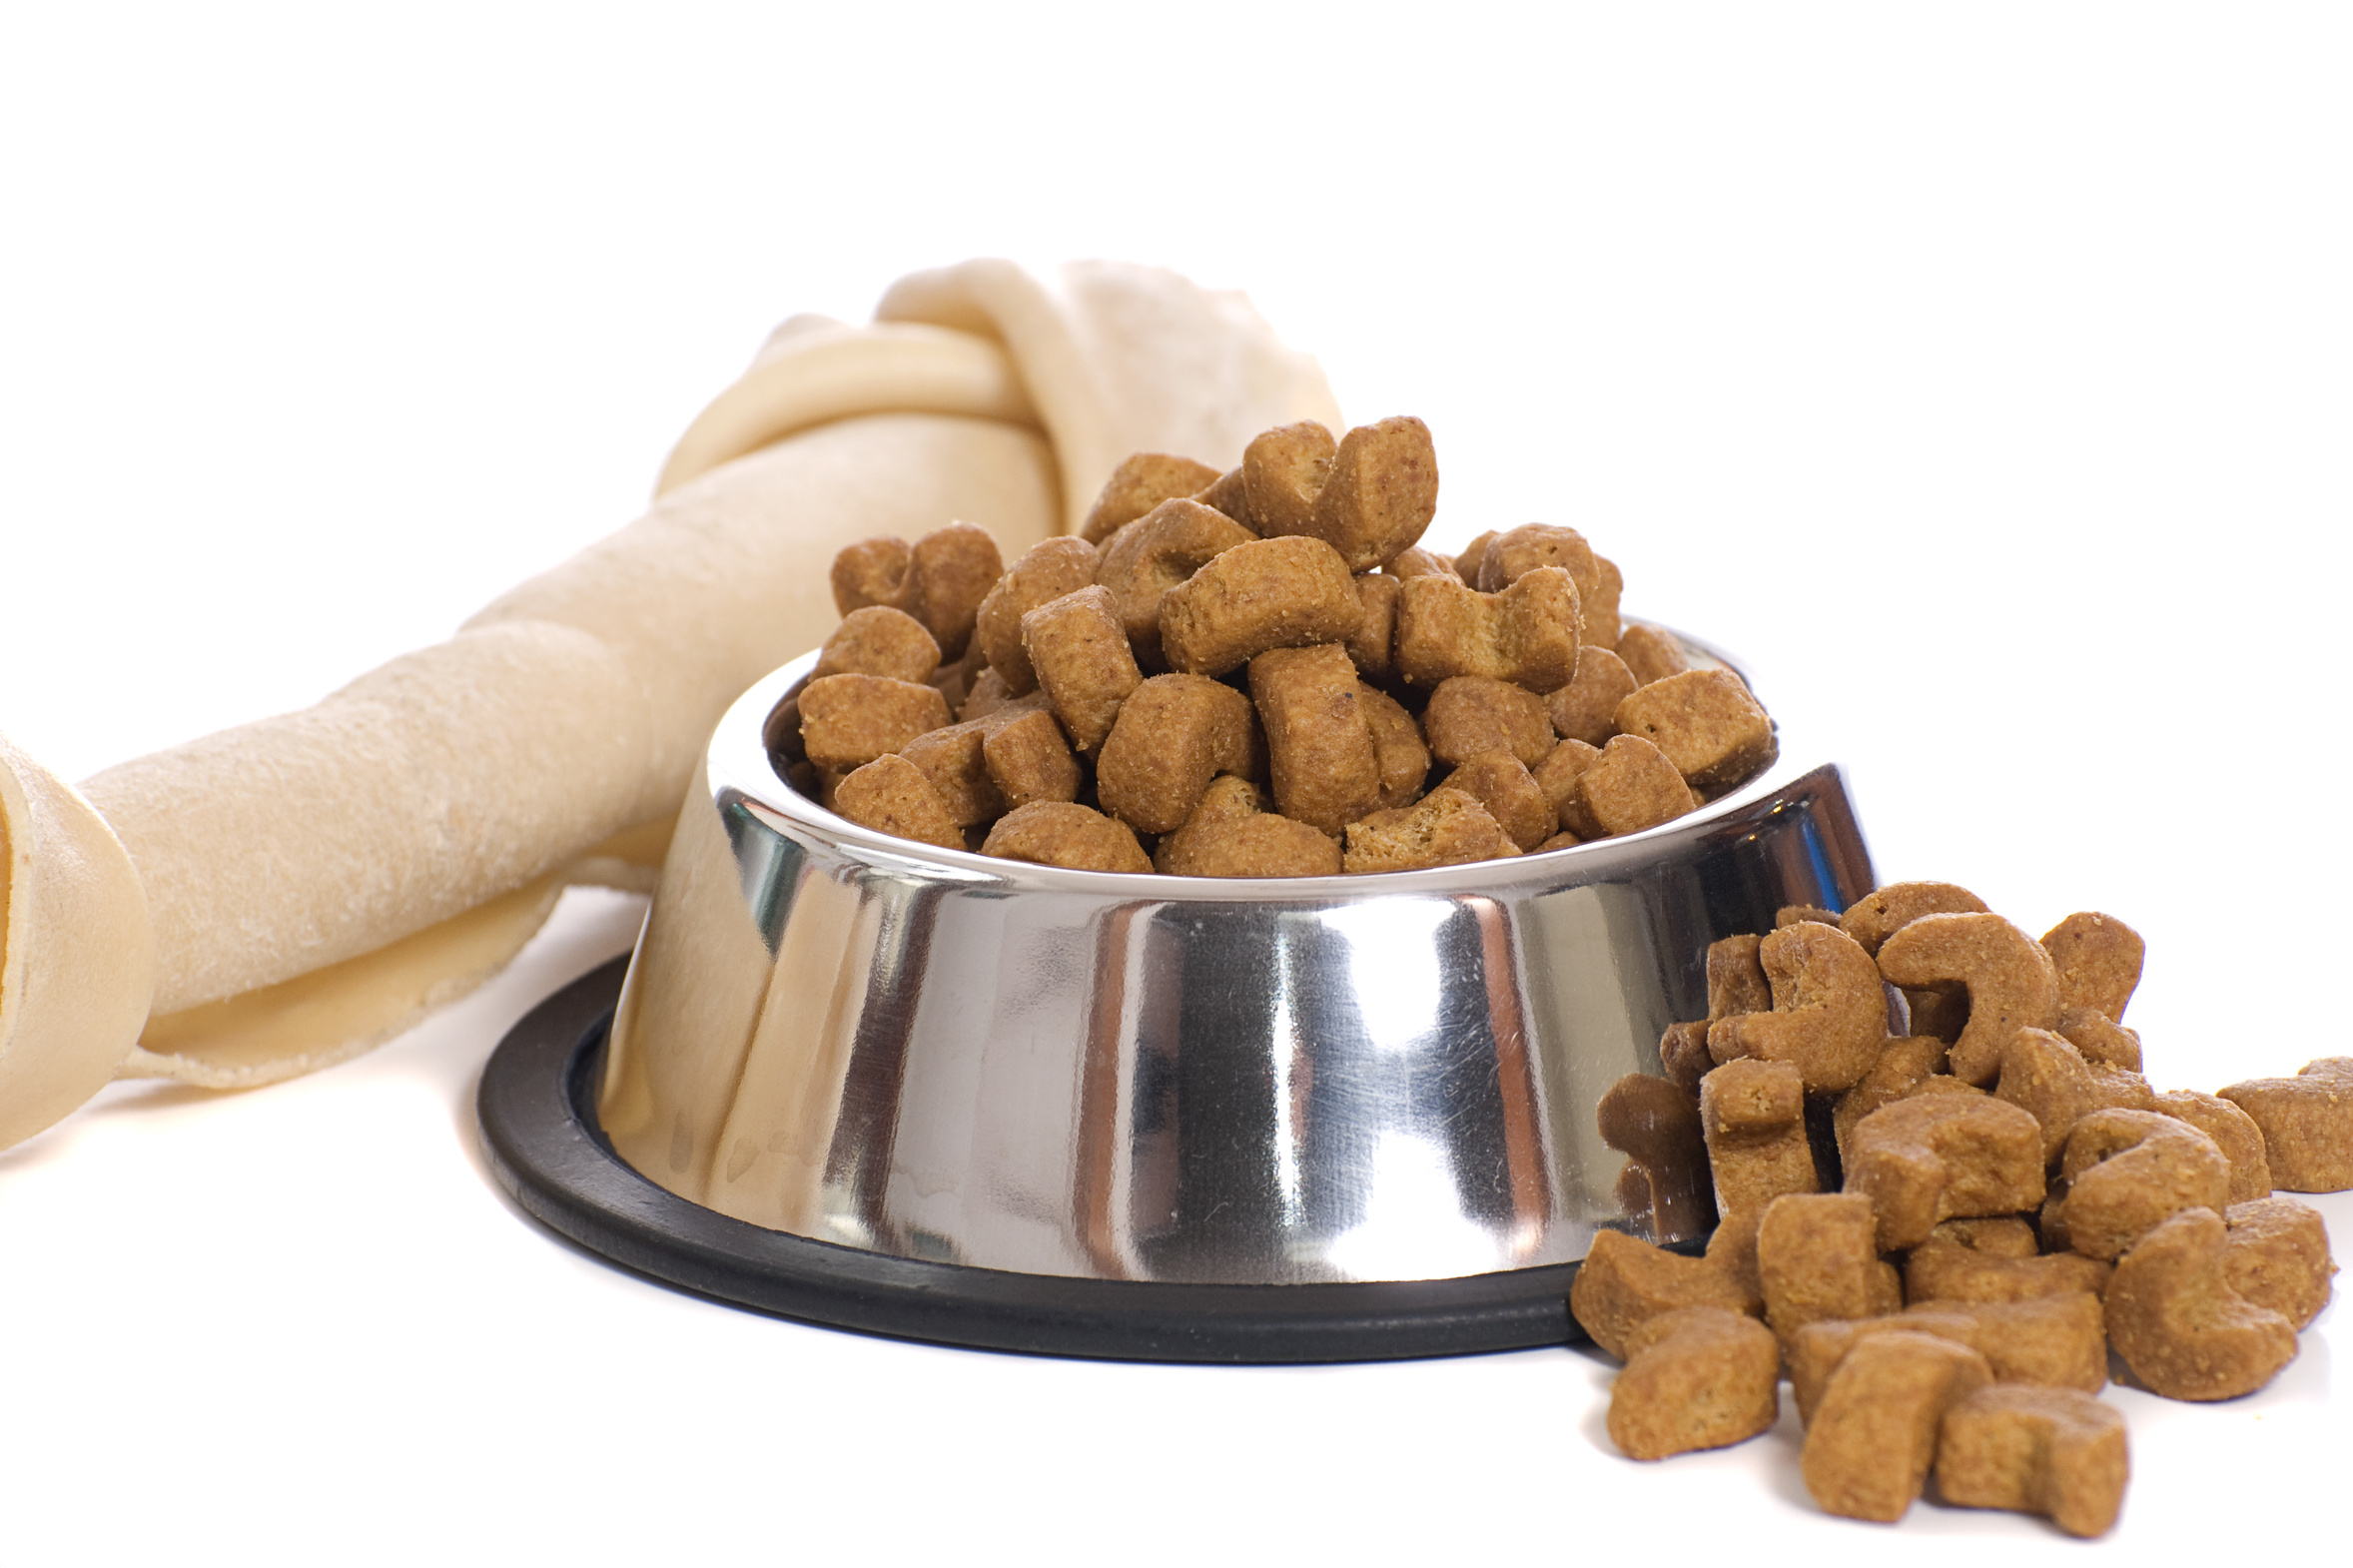 FDA and CDC investigate cases of Salmonella linked to Multiple Brands of pet food